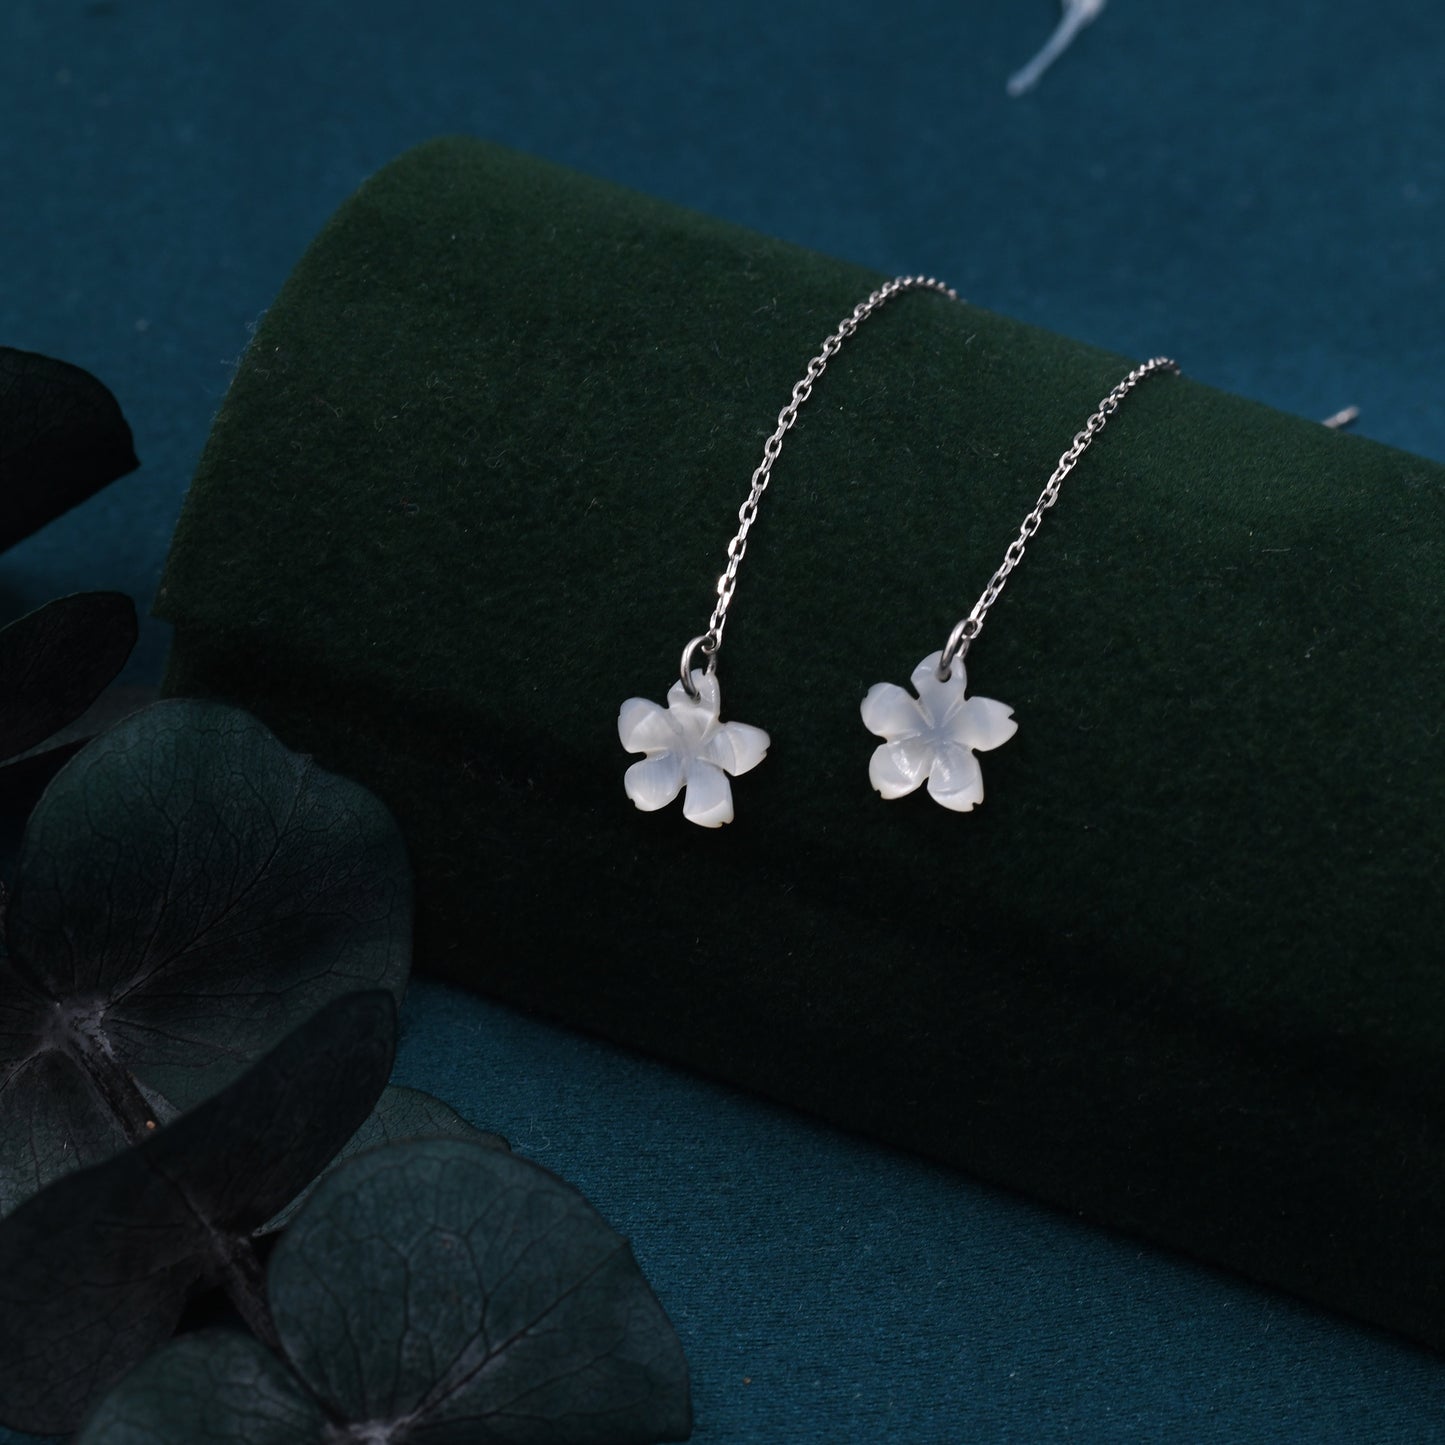 Hand Carved Mother of Pearl Cherry Blossom Threader Earrings in Sterling Silver, Apple Blossom Flower Ear Threaders - Dainty and Pretty